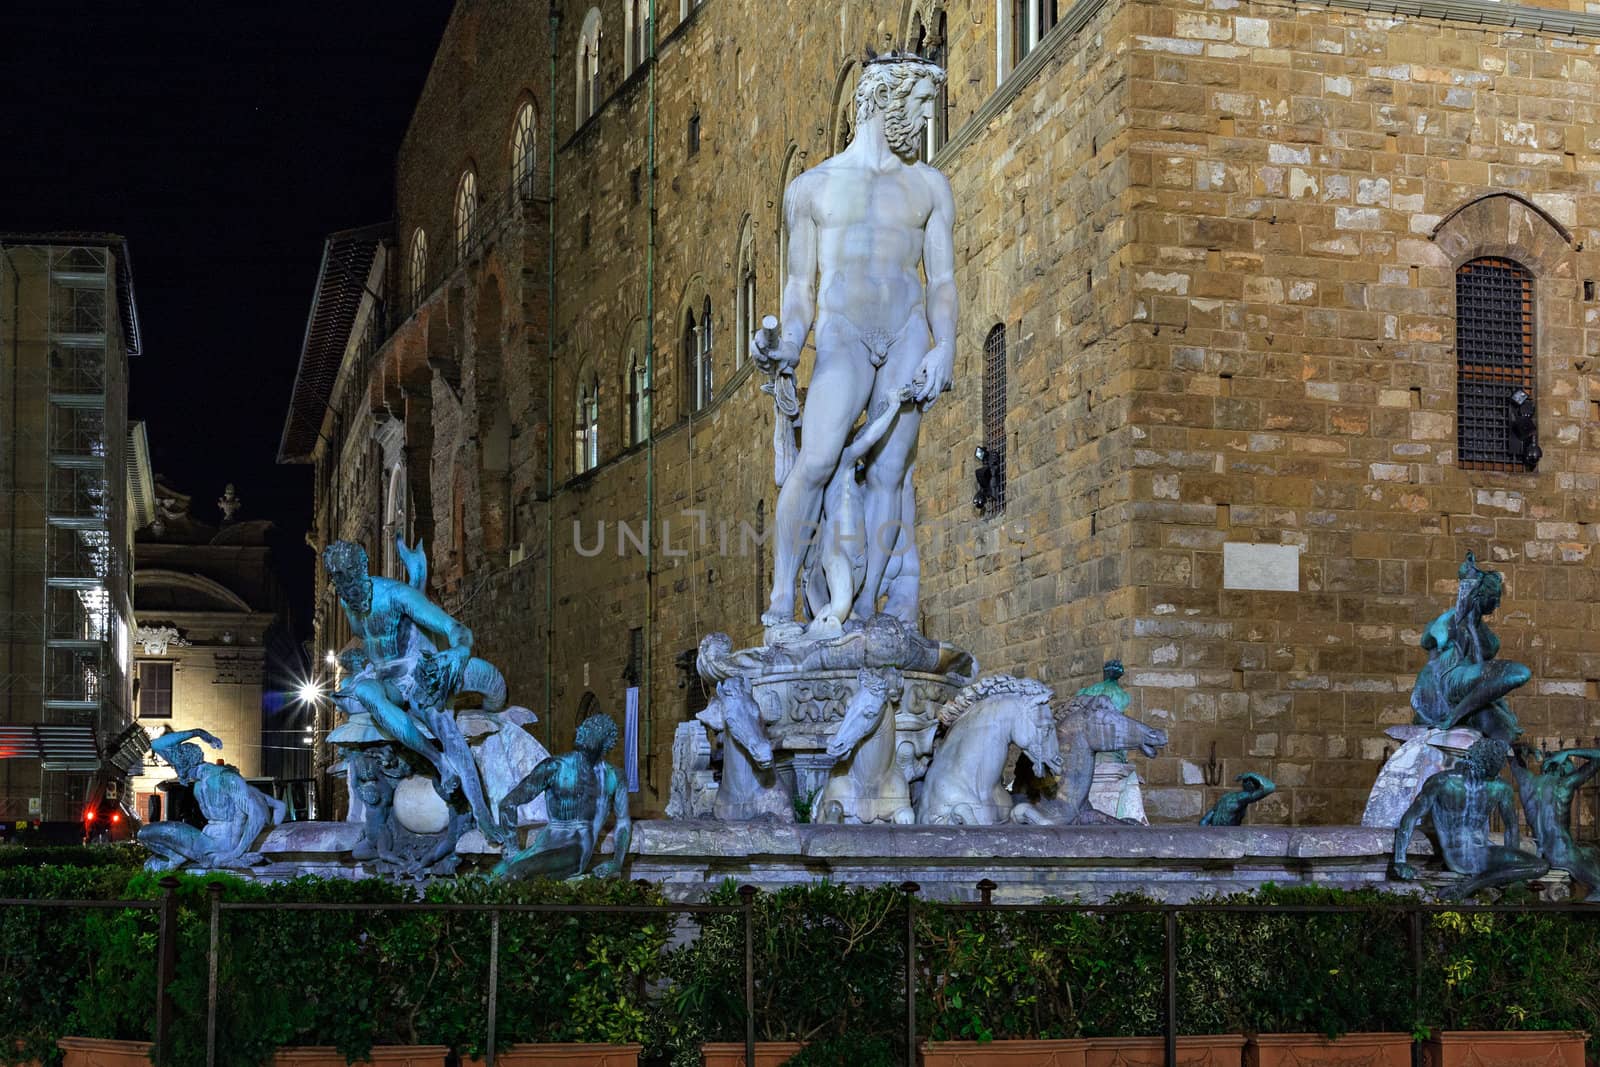 The fountain of neptune in florence tuscany